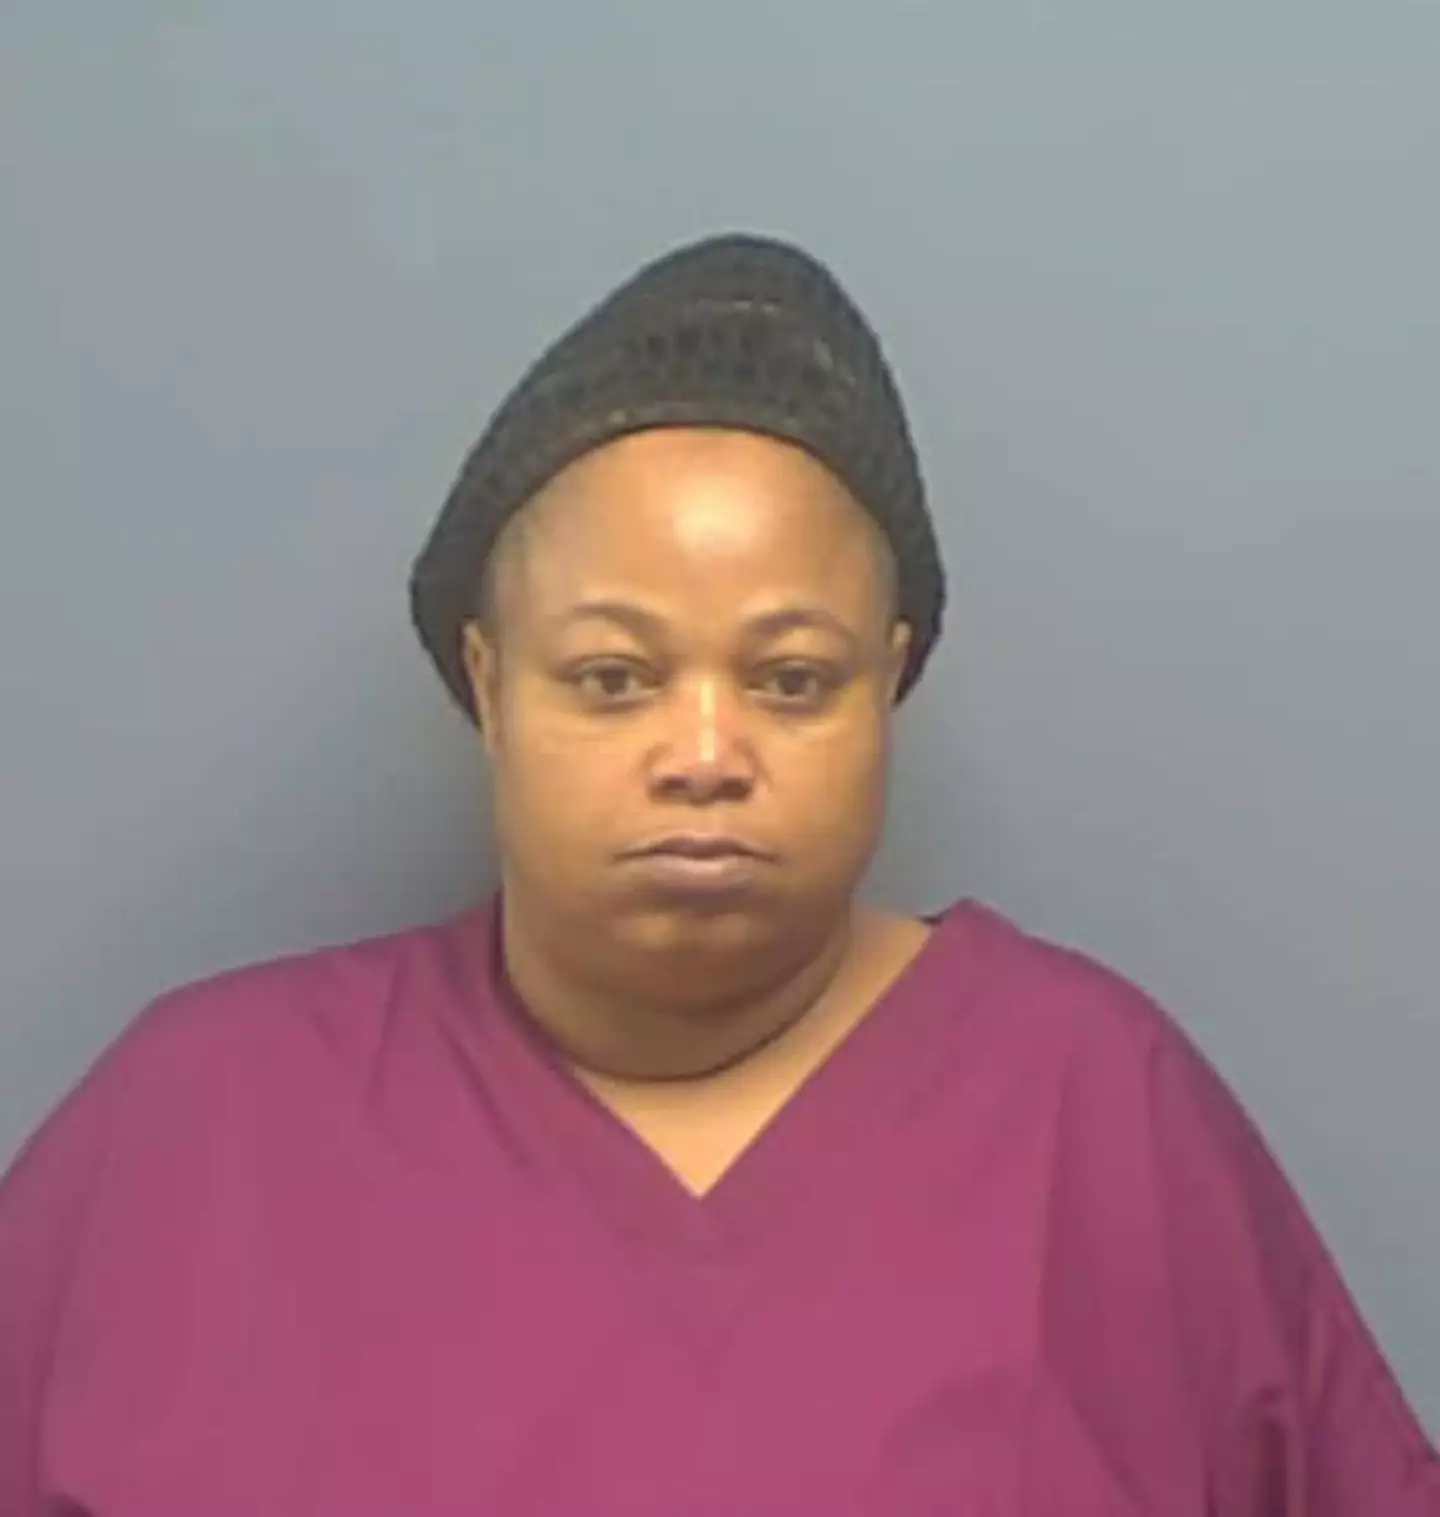 Tymetrica Cohn, 45, has been arrested and charged.